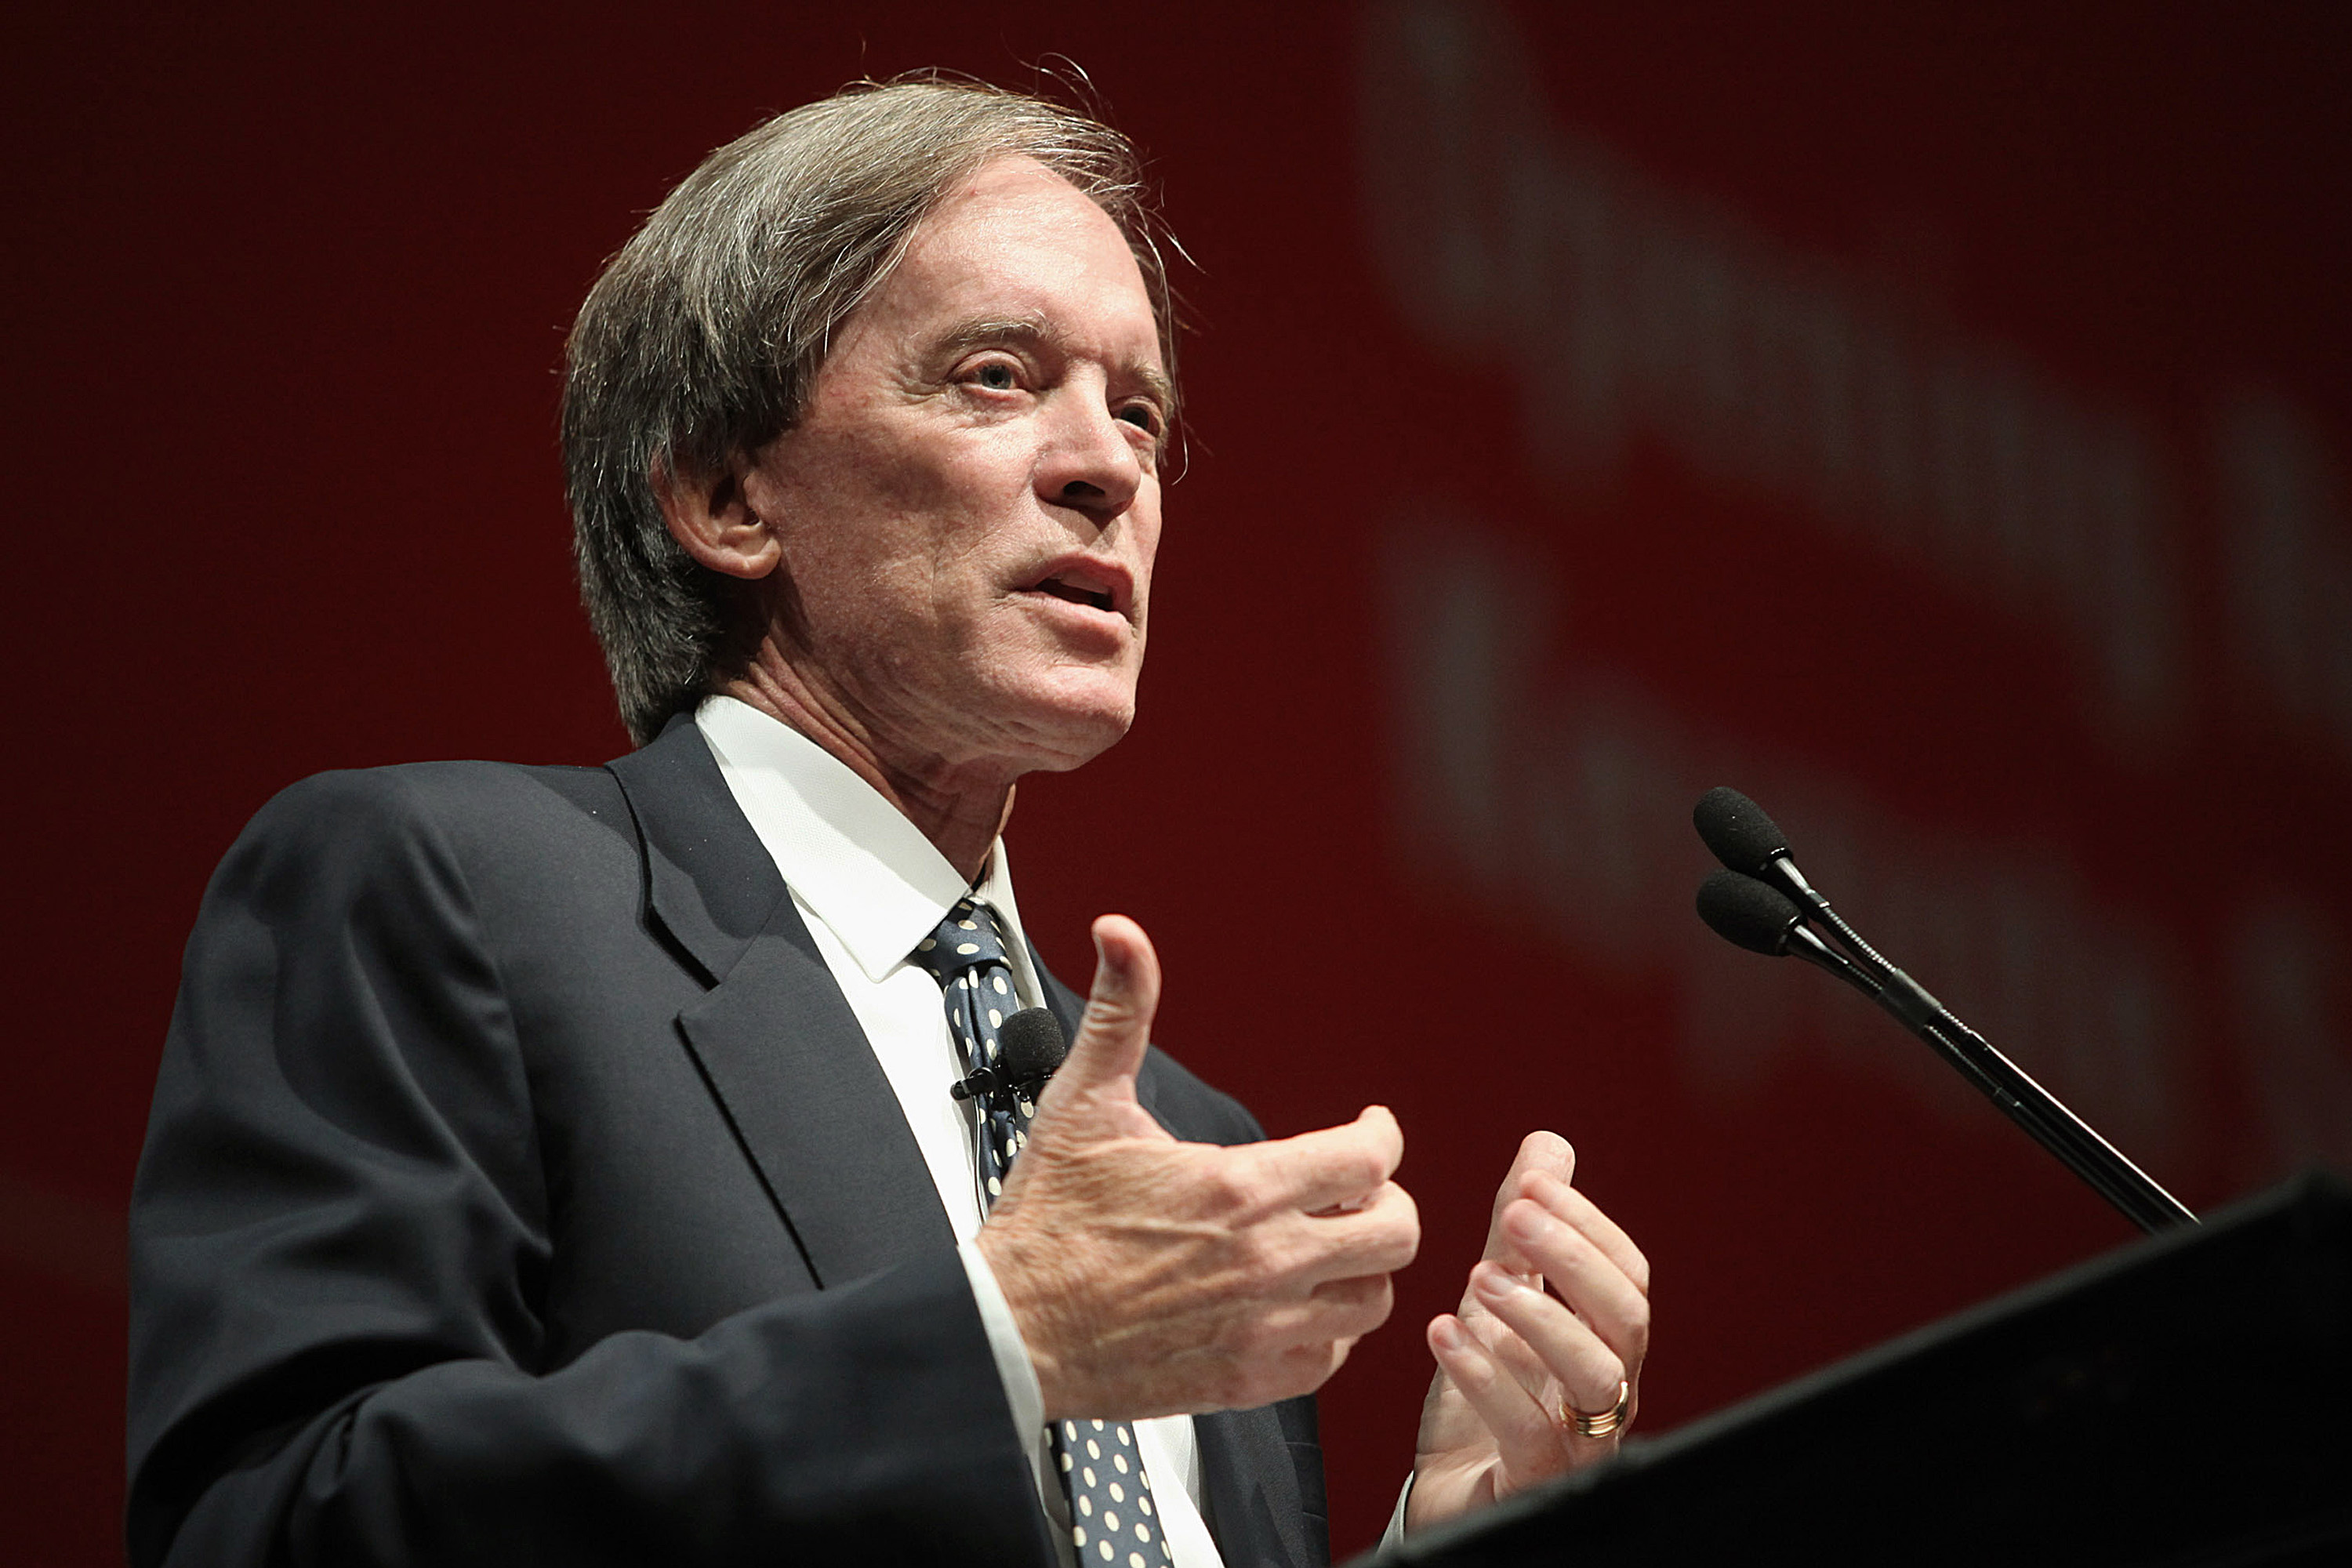 Bill Gross ran the world’s biggest bond fund at Pacific Investment Management Co., the $1.87 trillion firm he co-founded in 1971, before he abruptly departed for Denver-based Janus on Sept. 26. Photographer: Tim Boyle/Bloomberg
